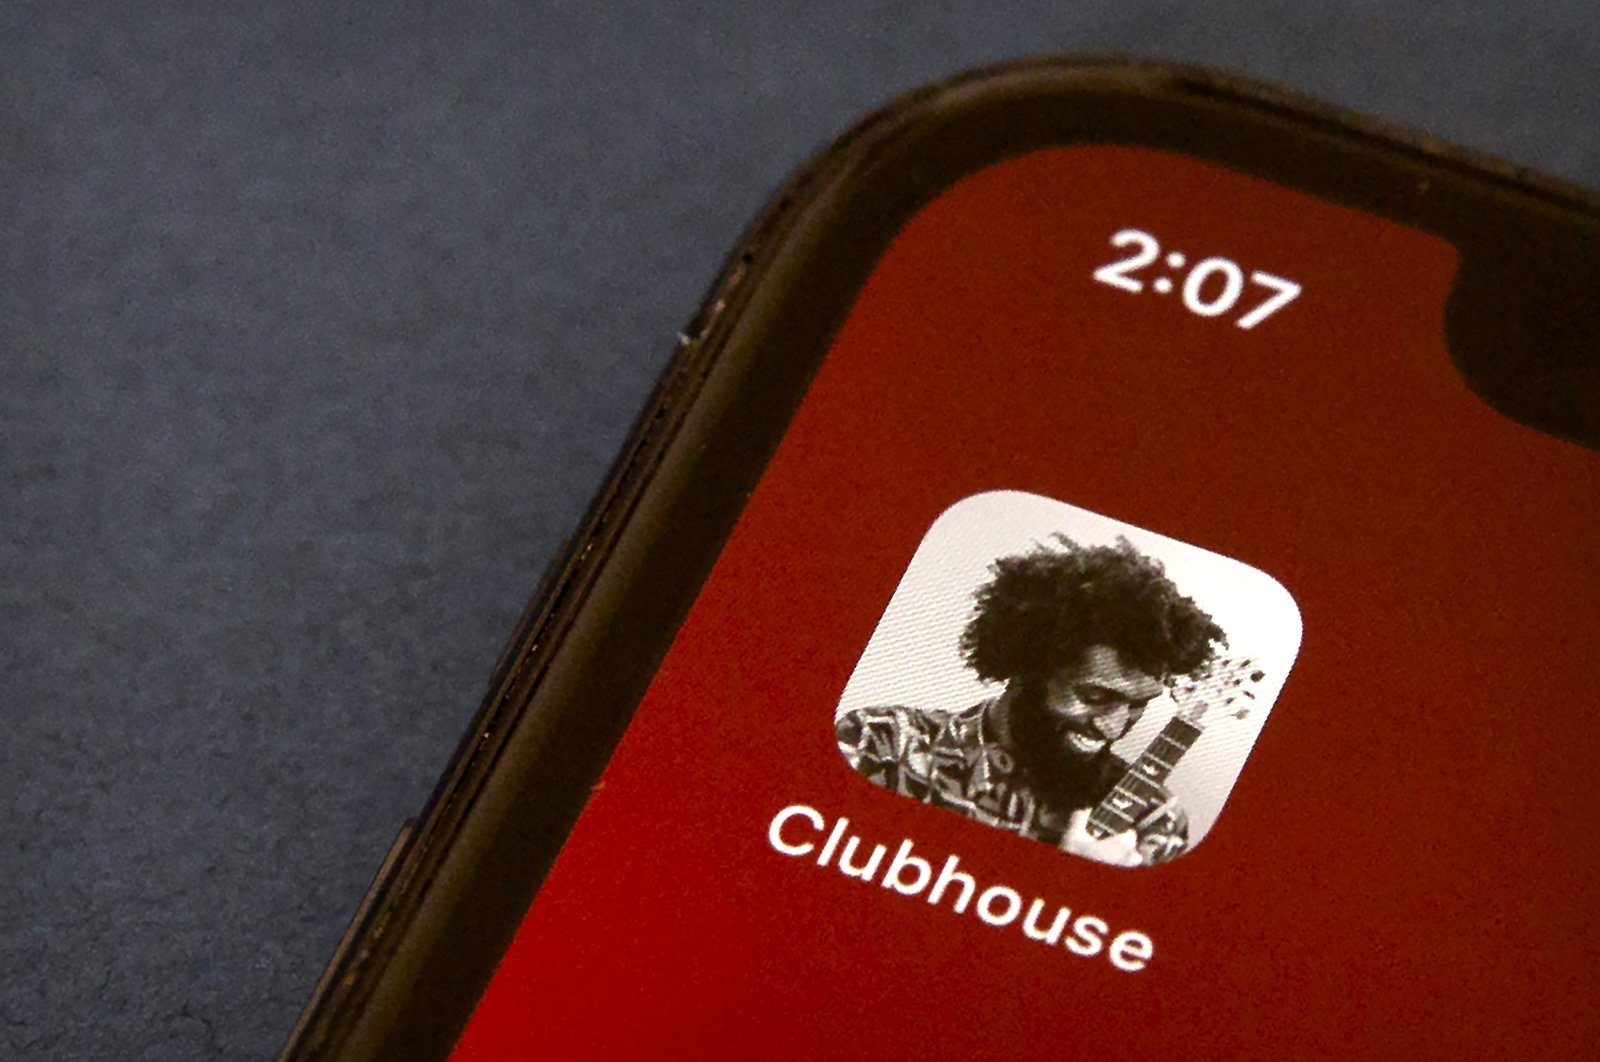 The icon for the social media app Clubhouse is seen on a smartphone screen in Beijing, China, Feb. 9, 2021. (AP Photo)